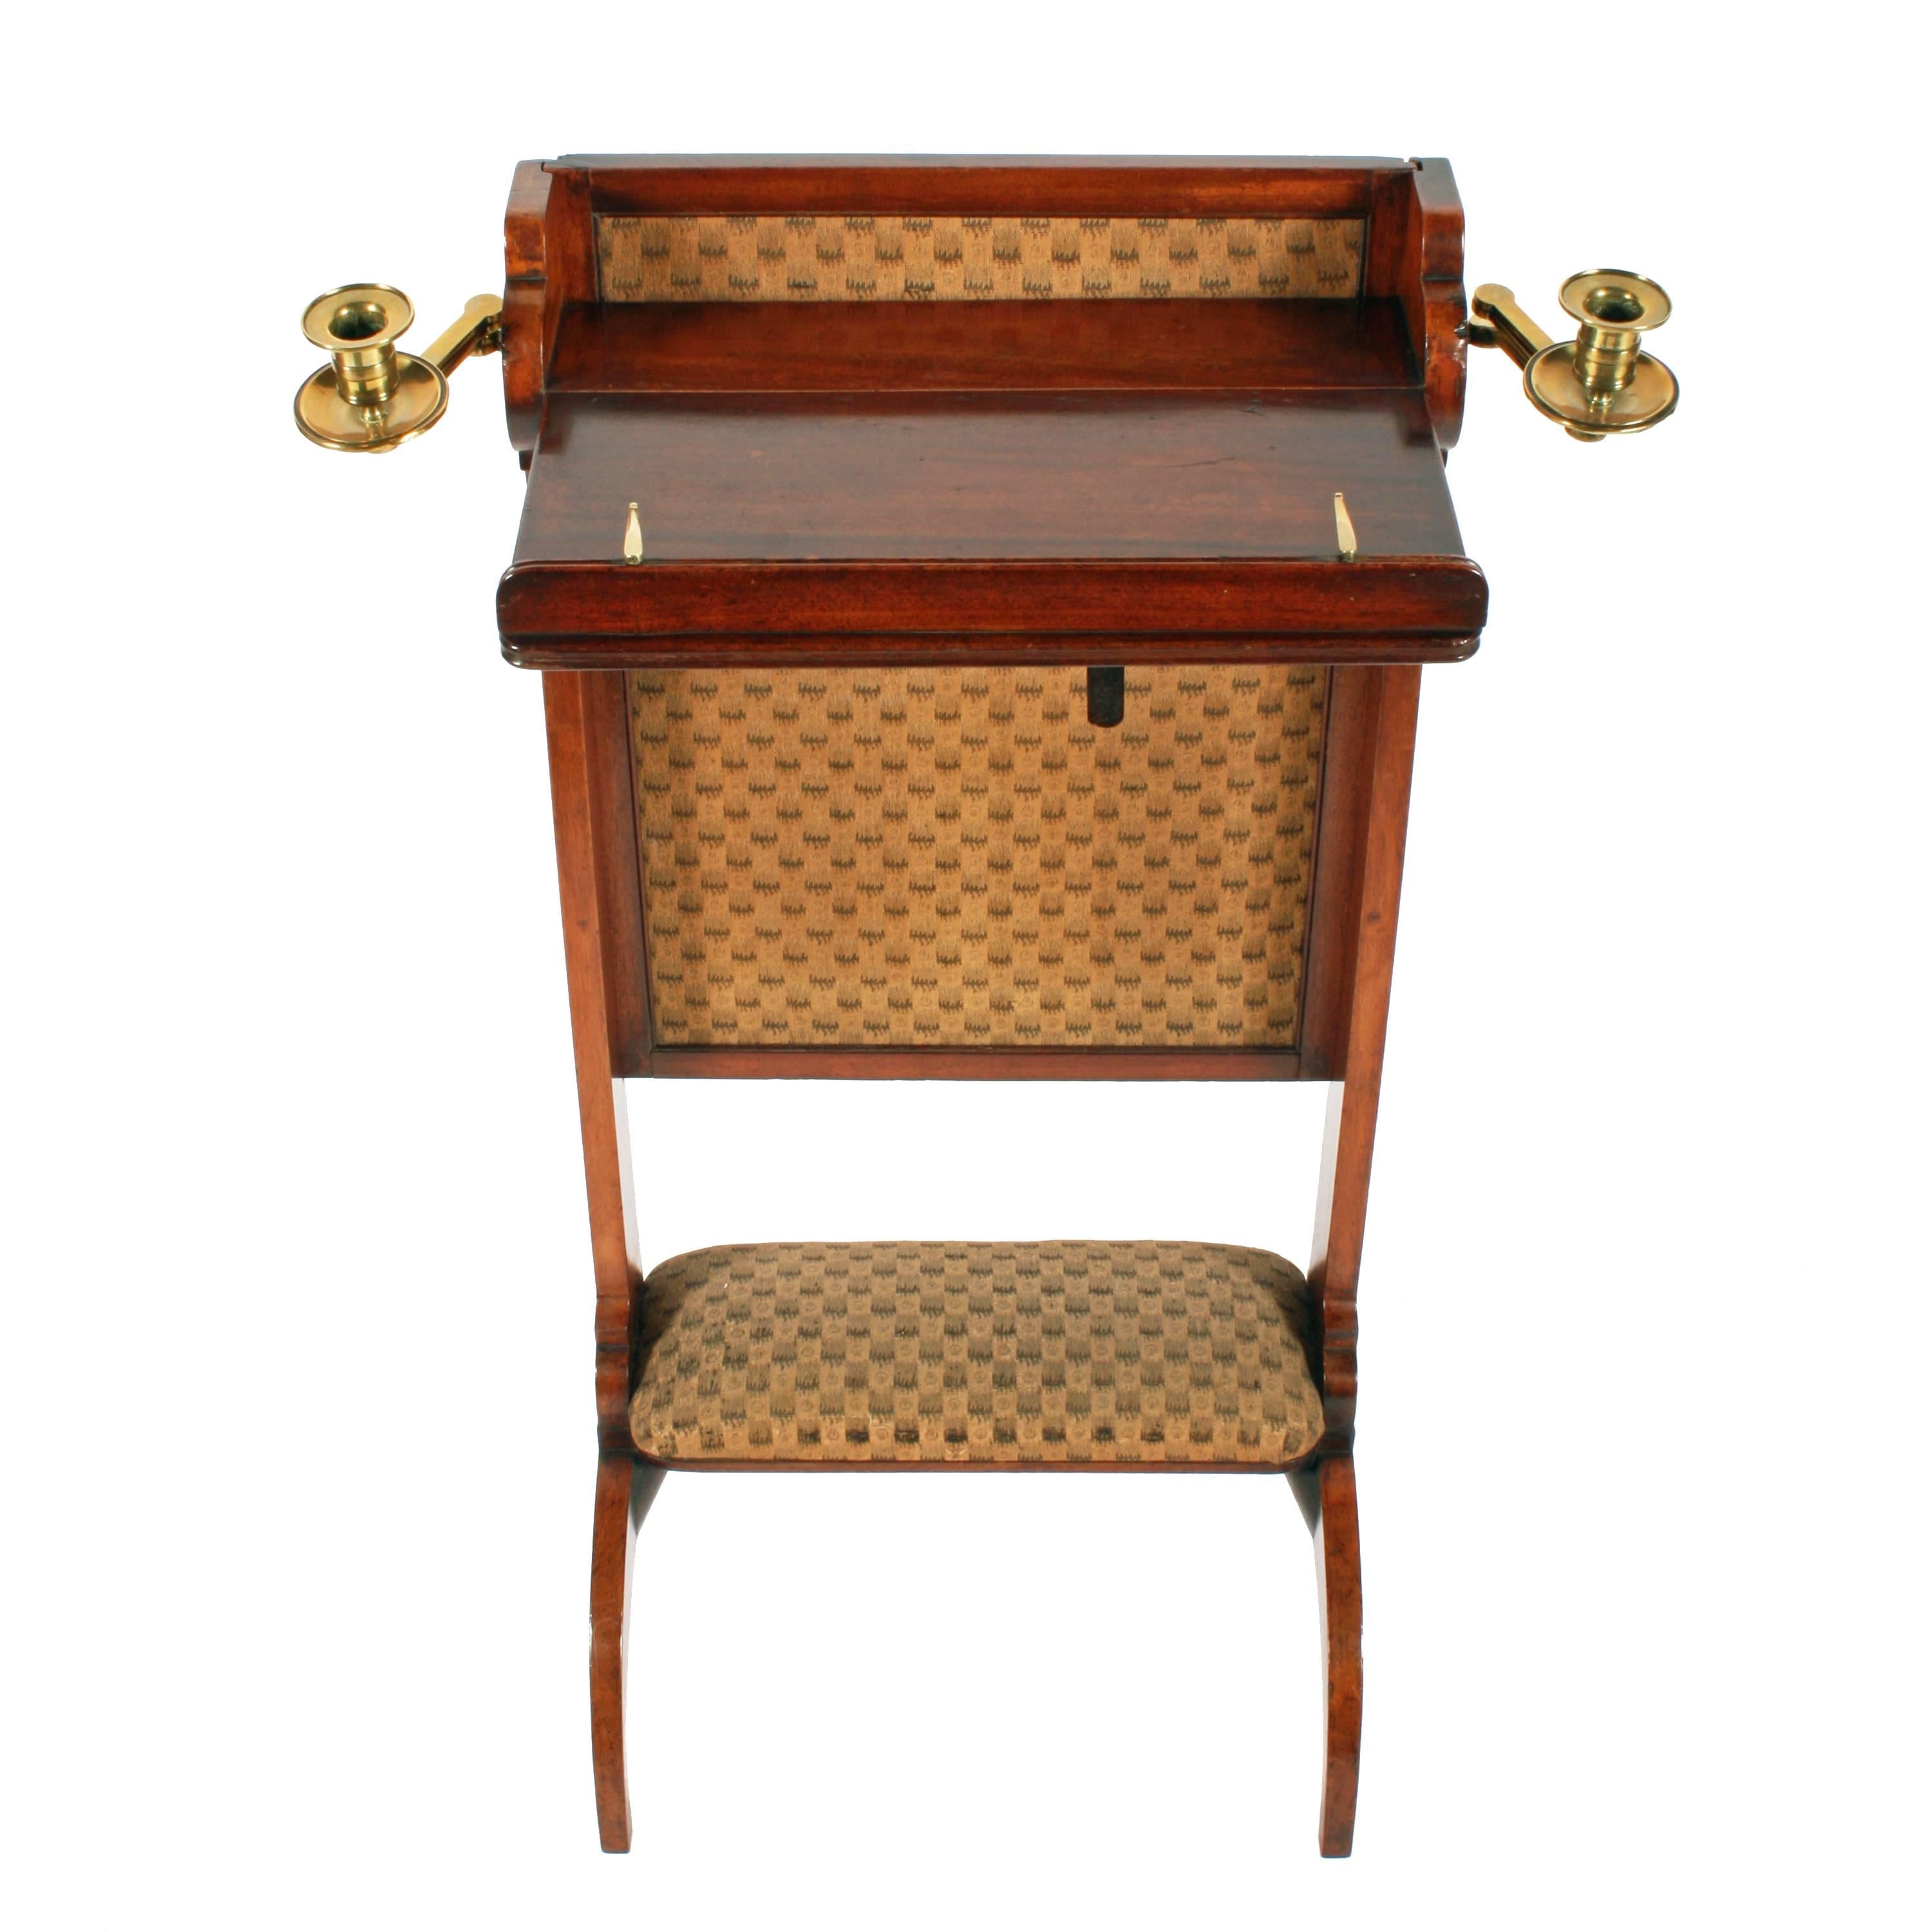 Early 19th Century George IV Combination Music Stand, Fire Screen and Foot Rest, circa 1820